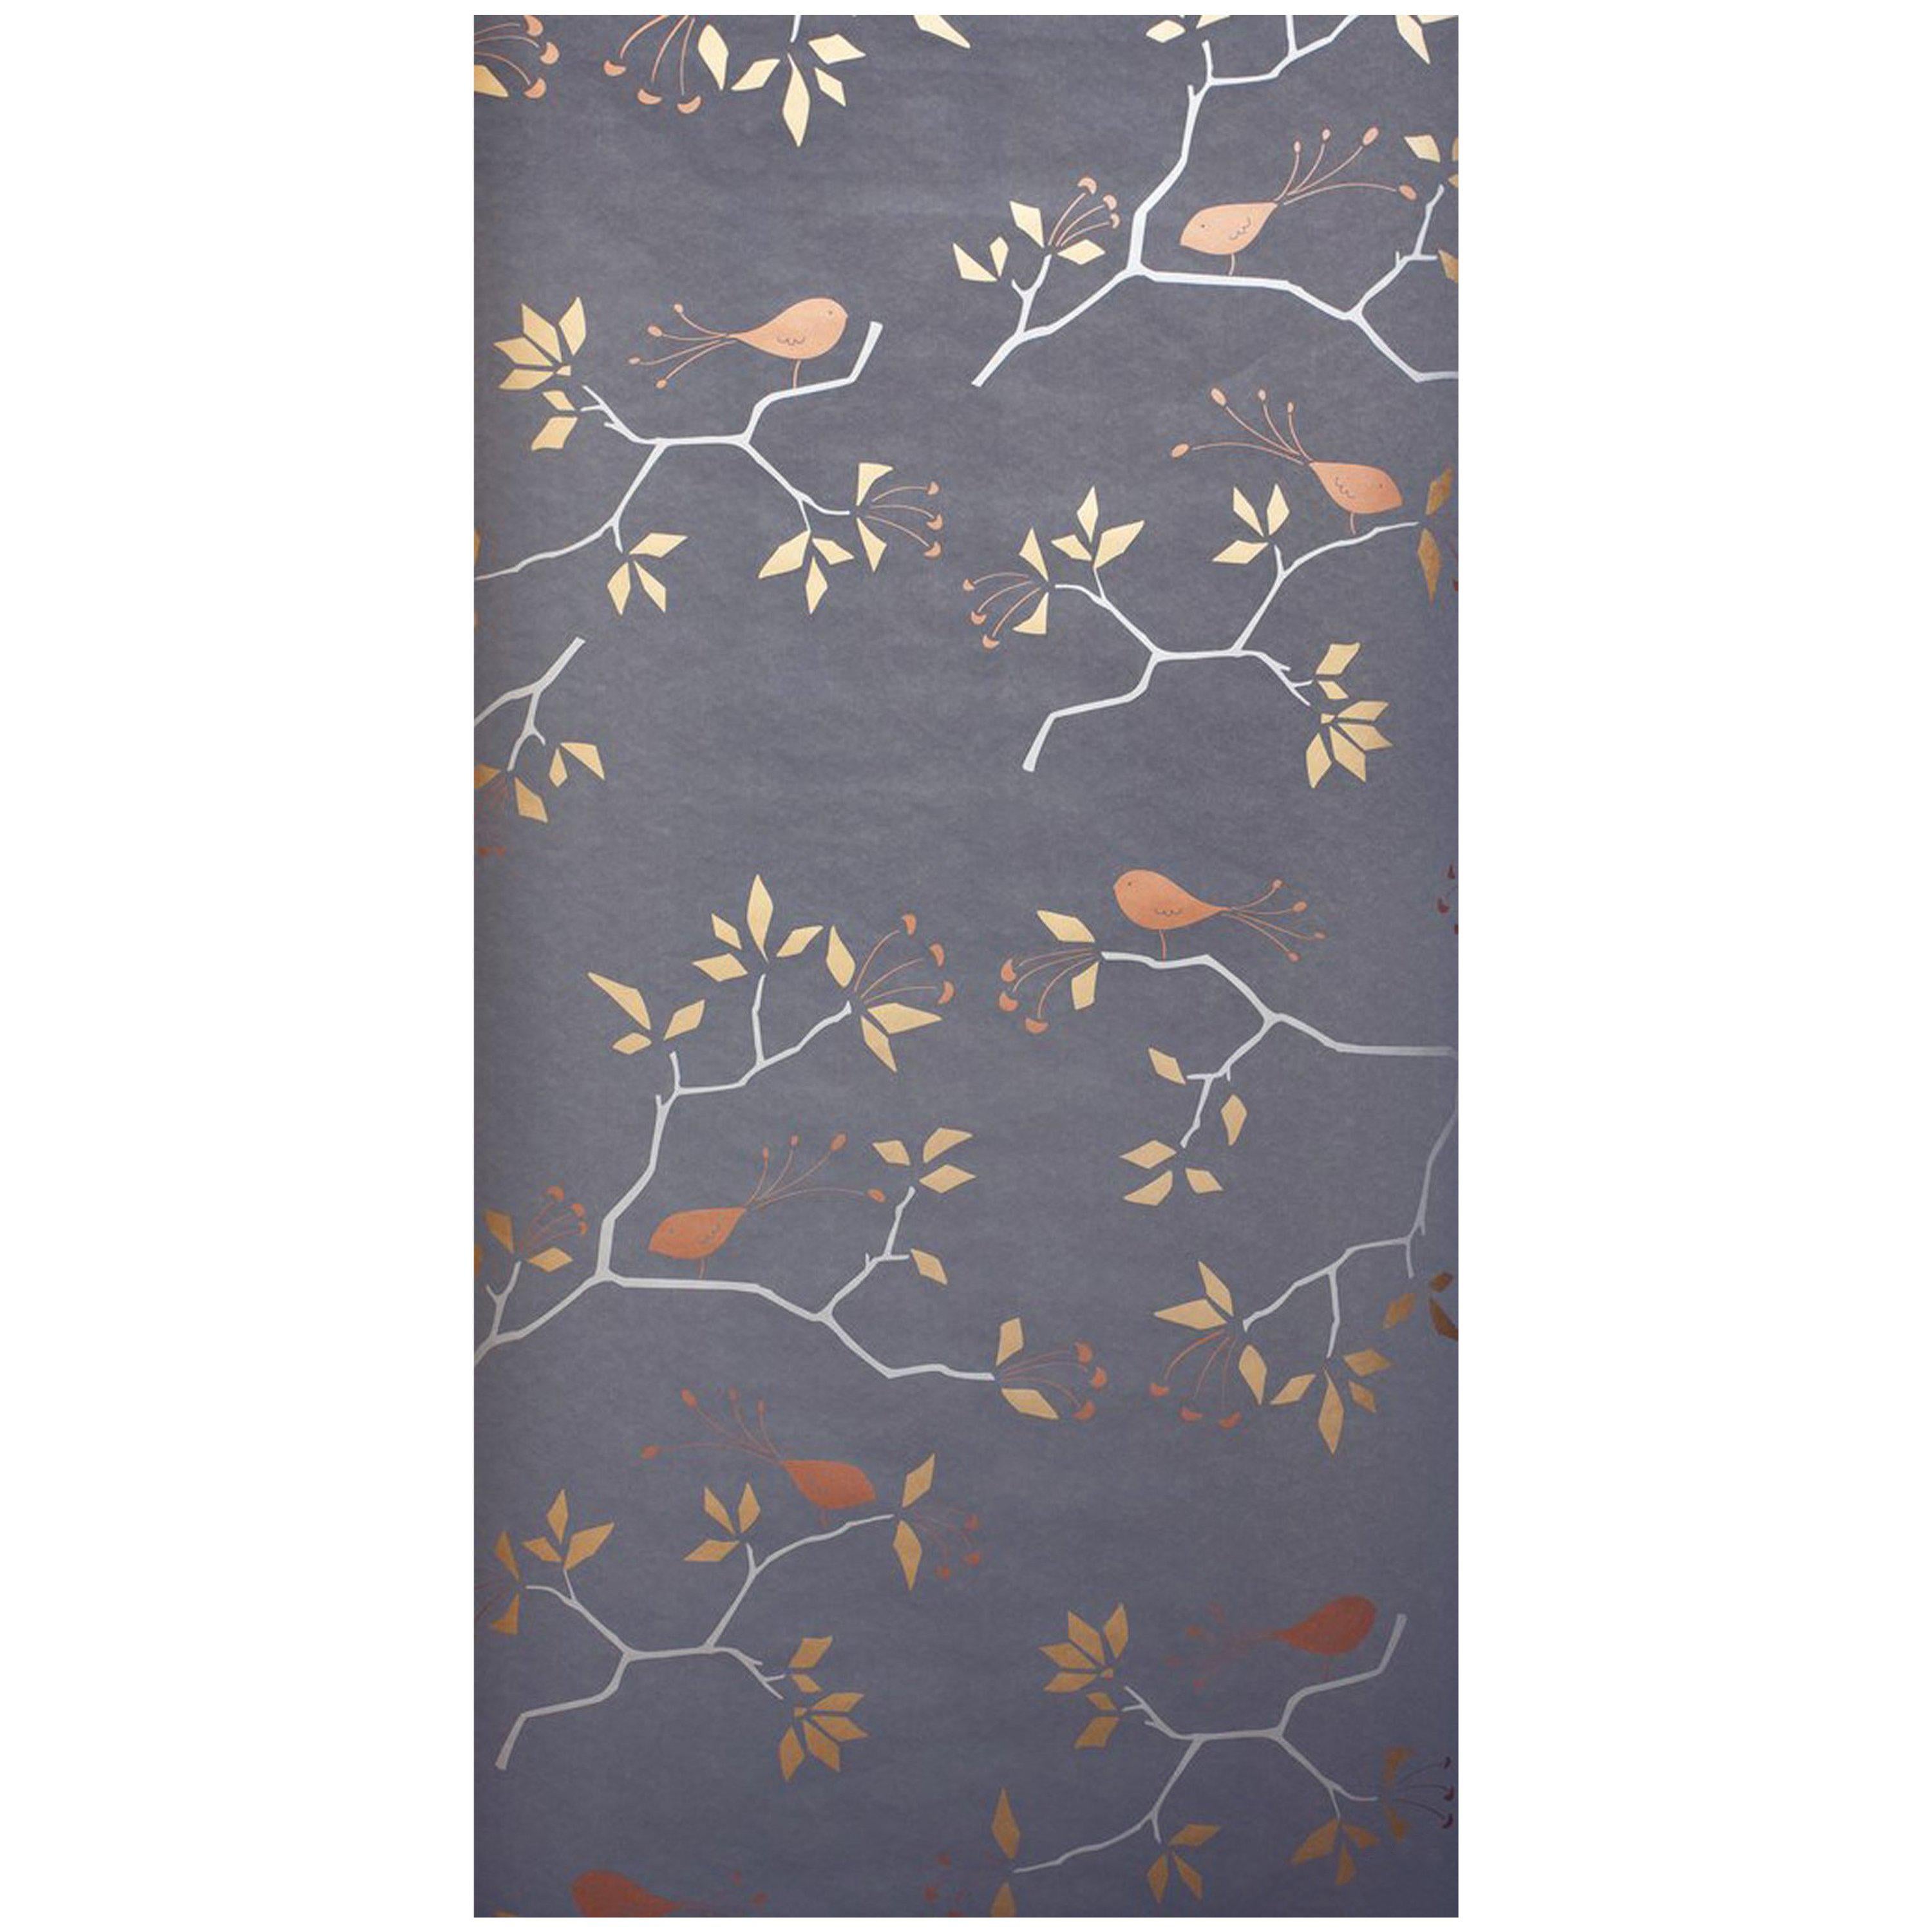 Geobird Screen Printed Wallpaper in Metallic Silver, Gold and Bronze on Graphite For Sale